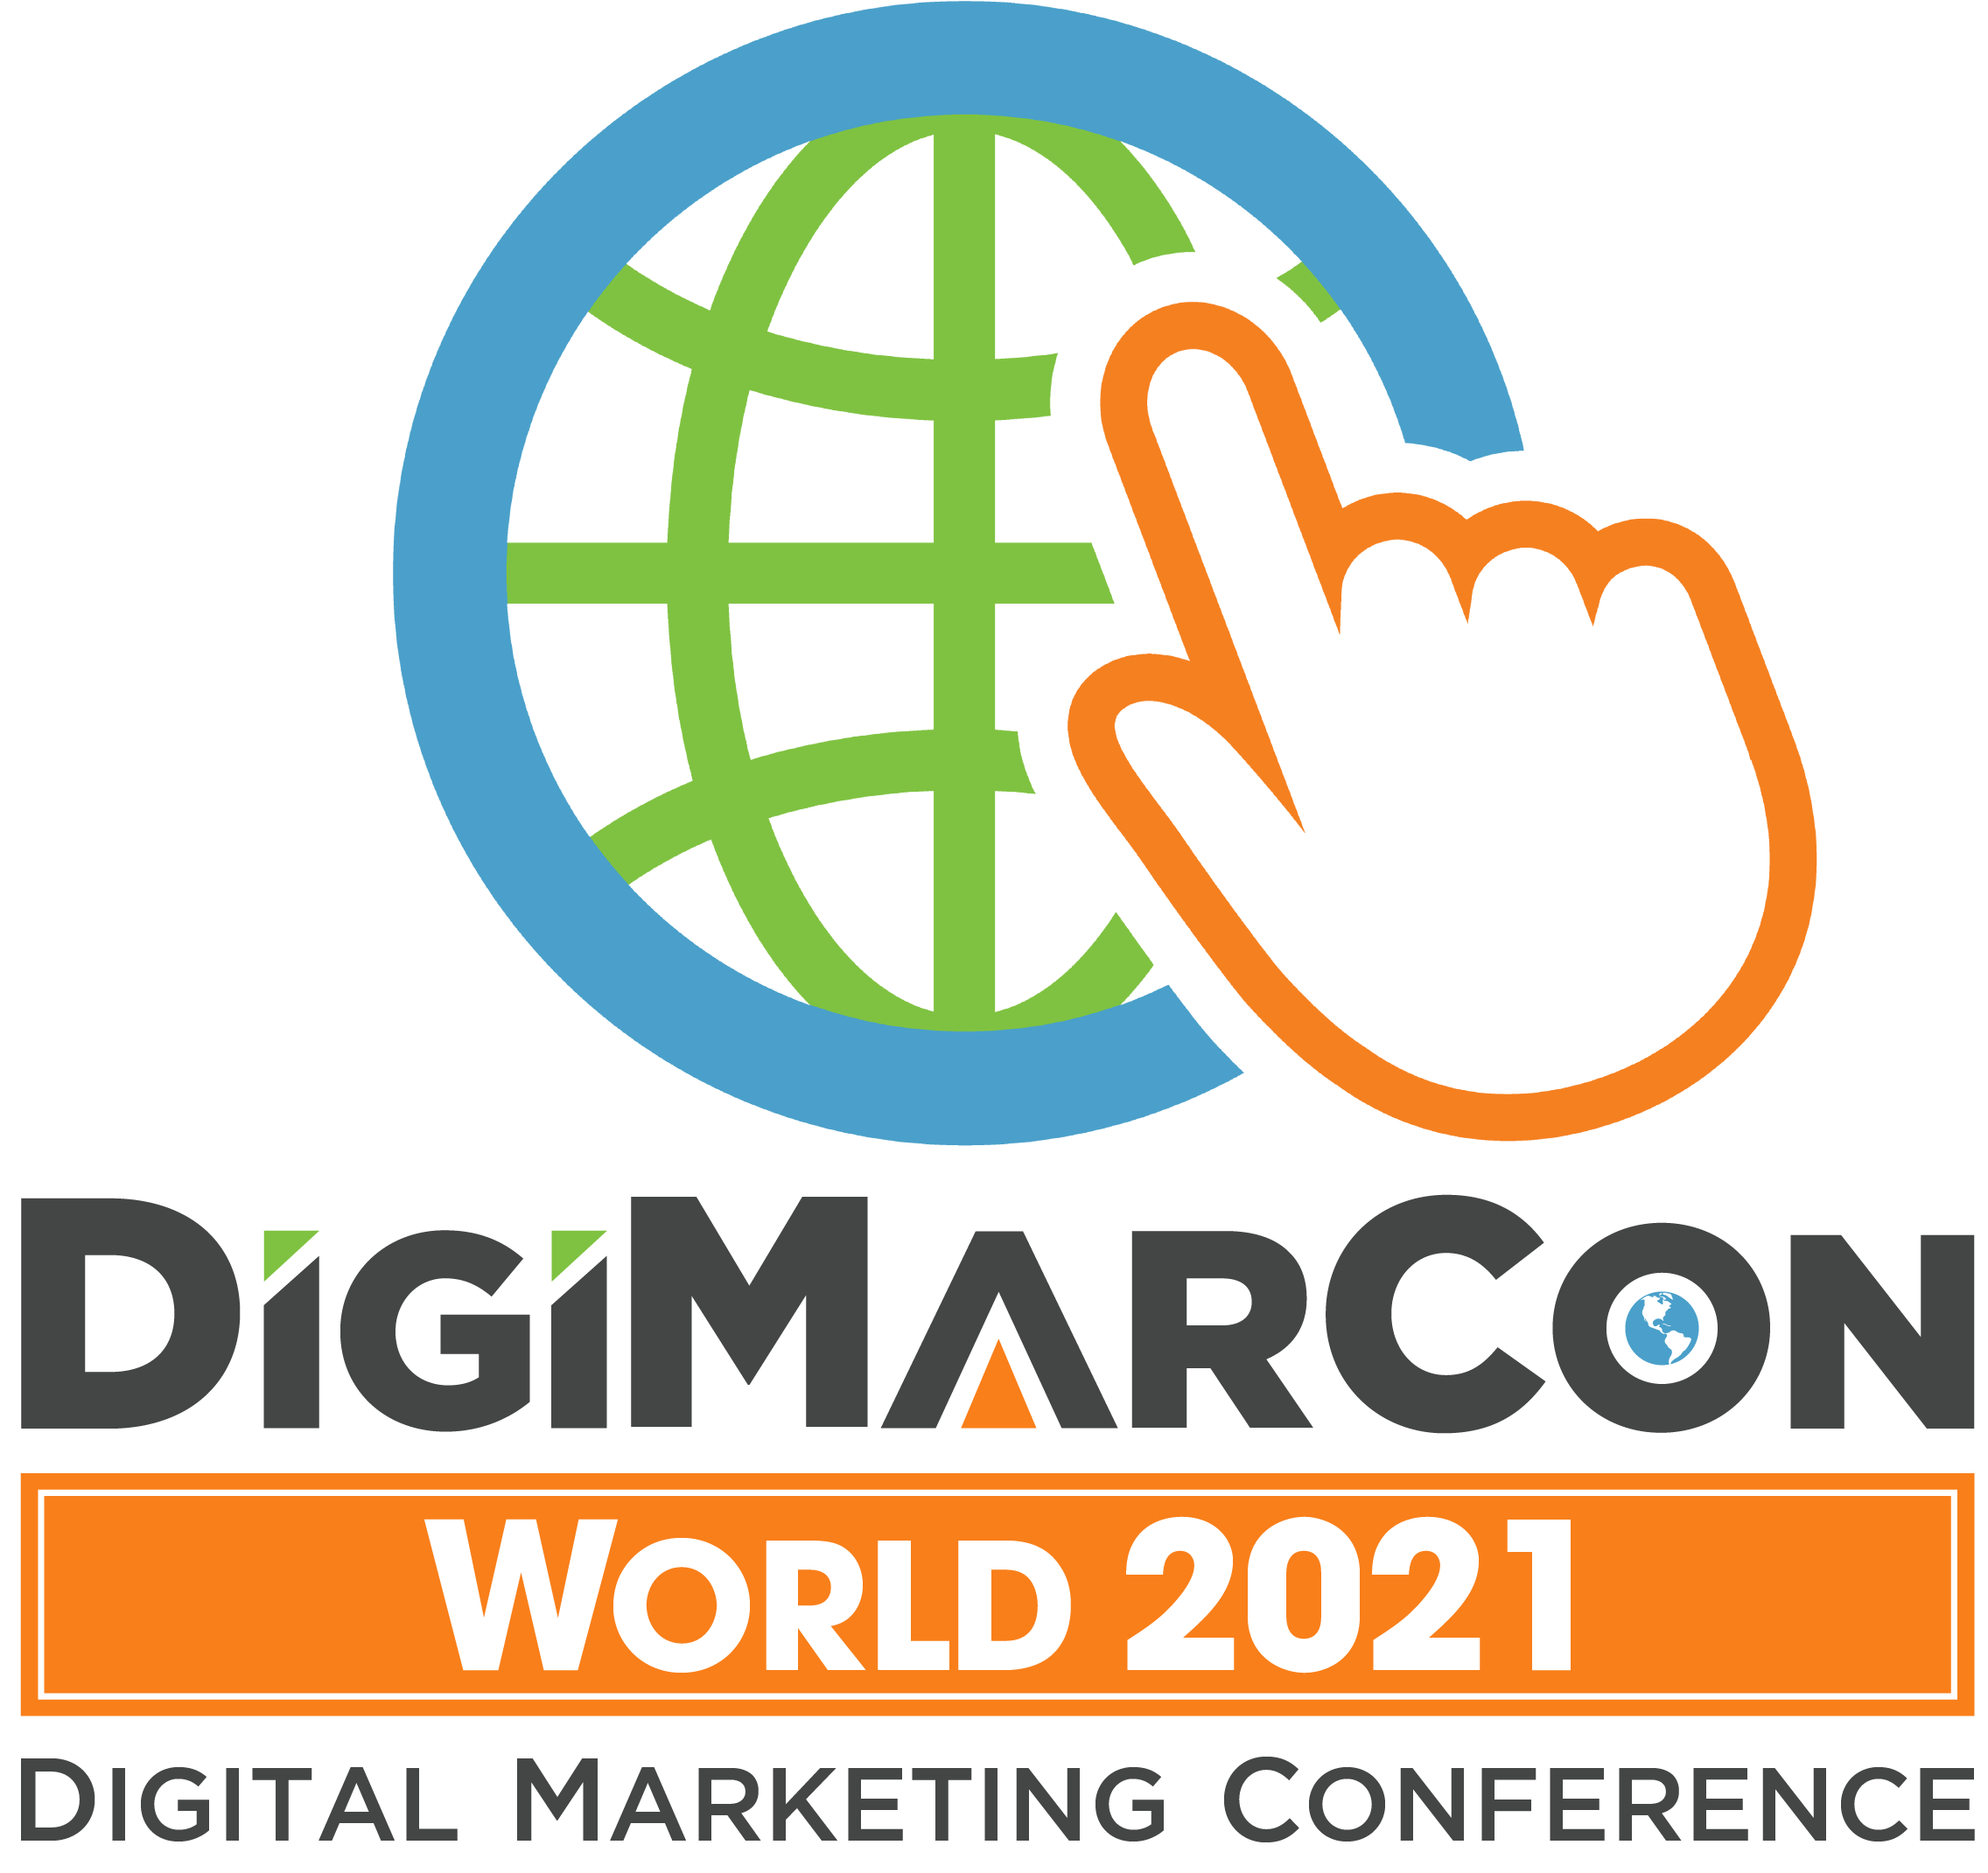 DigiMarCon World 2021 - Digital Marketing, Media and Advertising Conference, Ben Hill, Georgia, United States